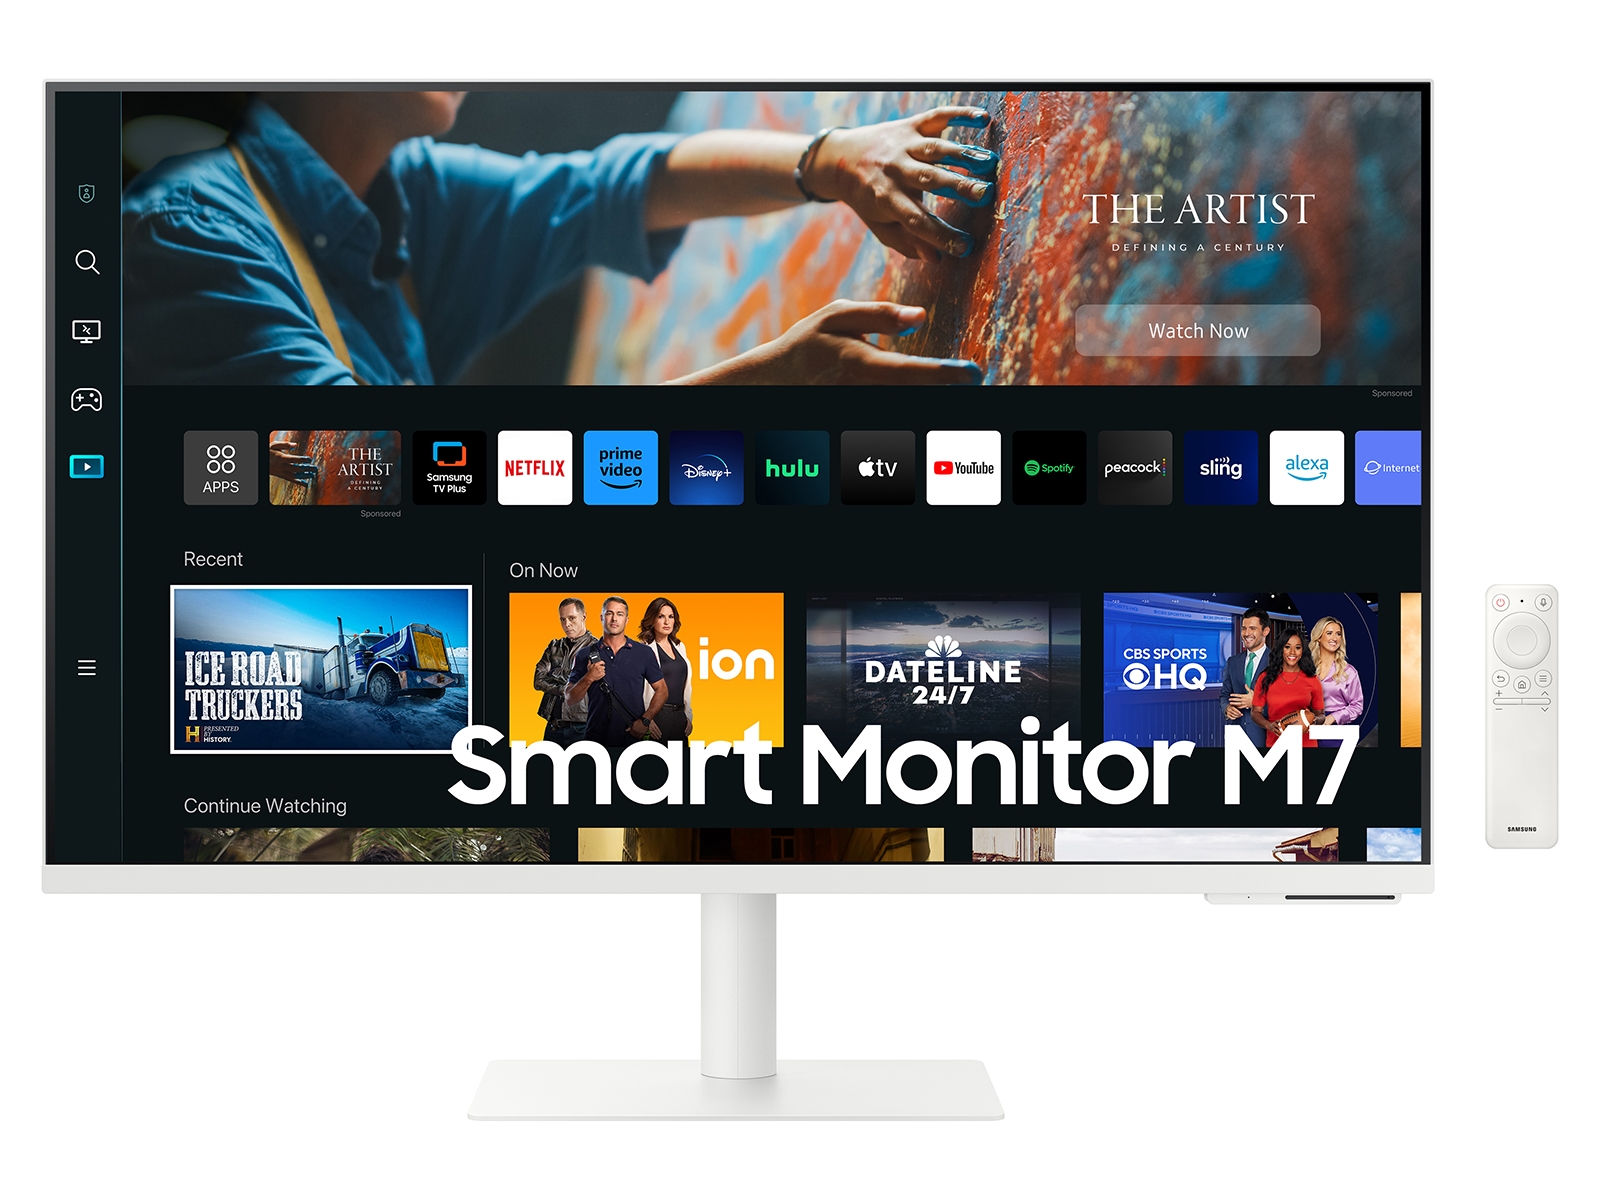 32 M50B FHD Smart Monitor with Streaming TV in White - LS32BM501ENXZA